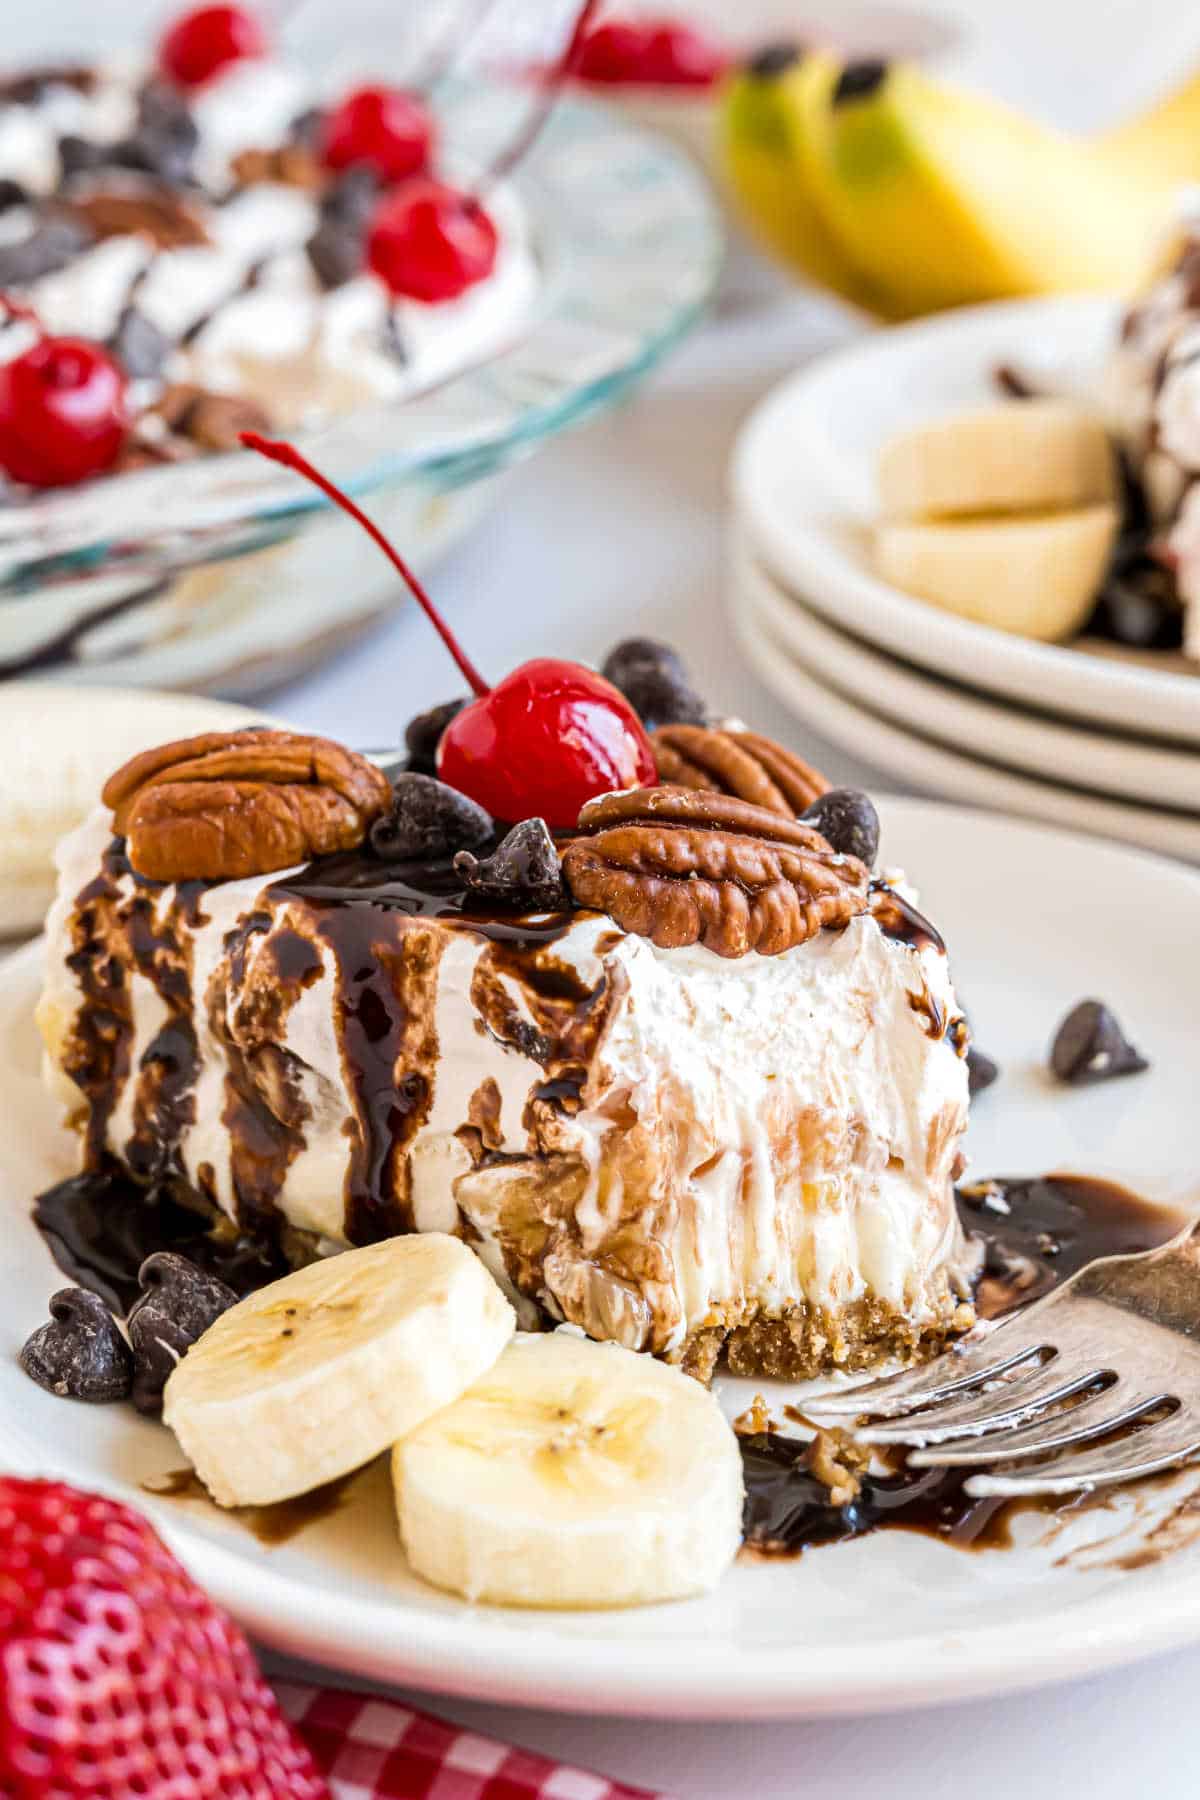 Slice of banana split cheesecake with a bite taken out.